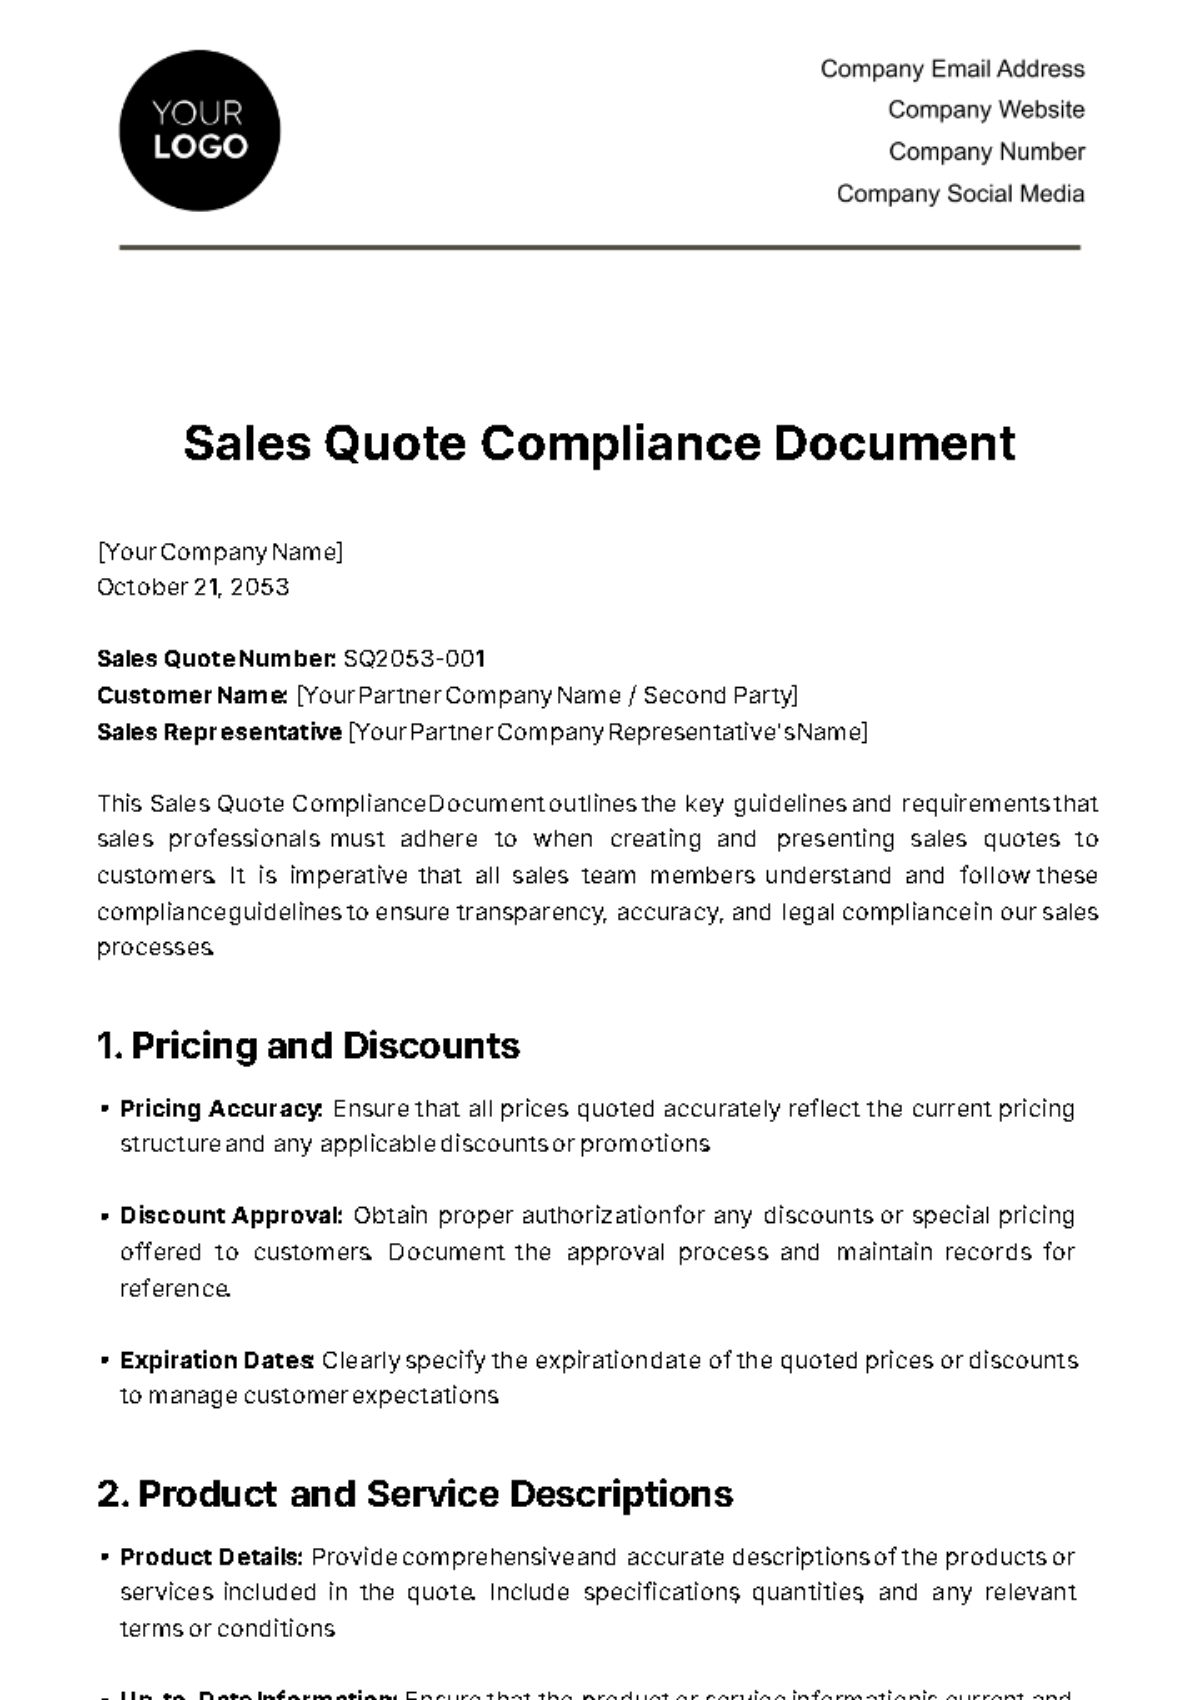 Sales Quote Compliance Document Template